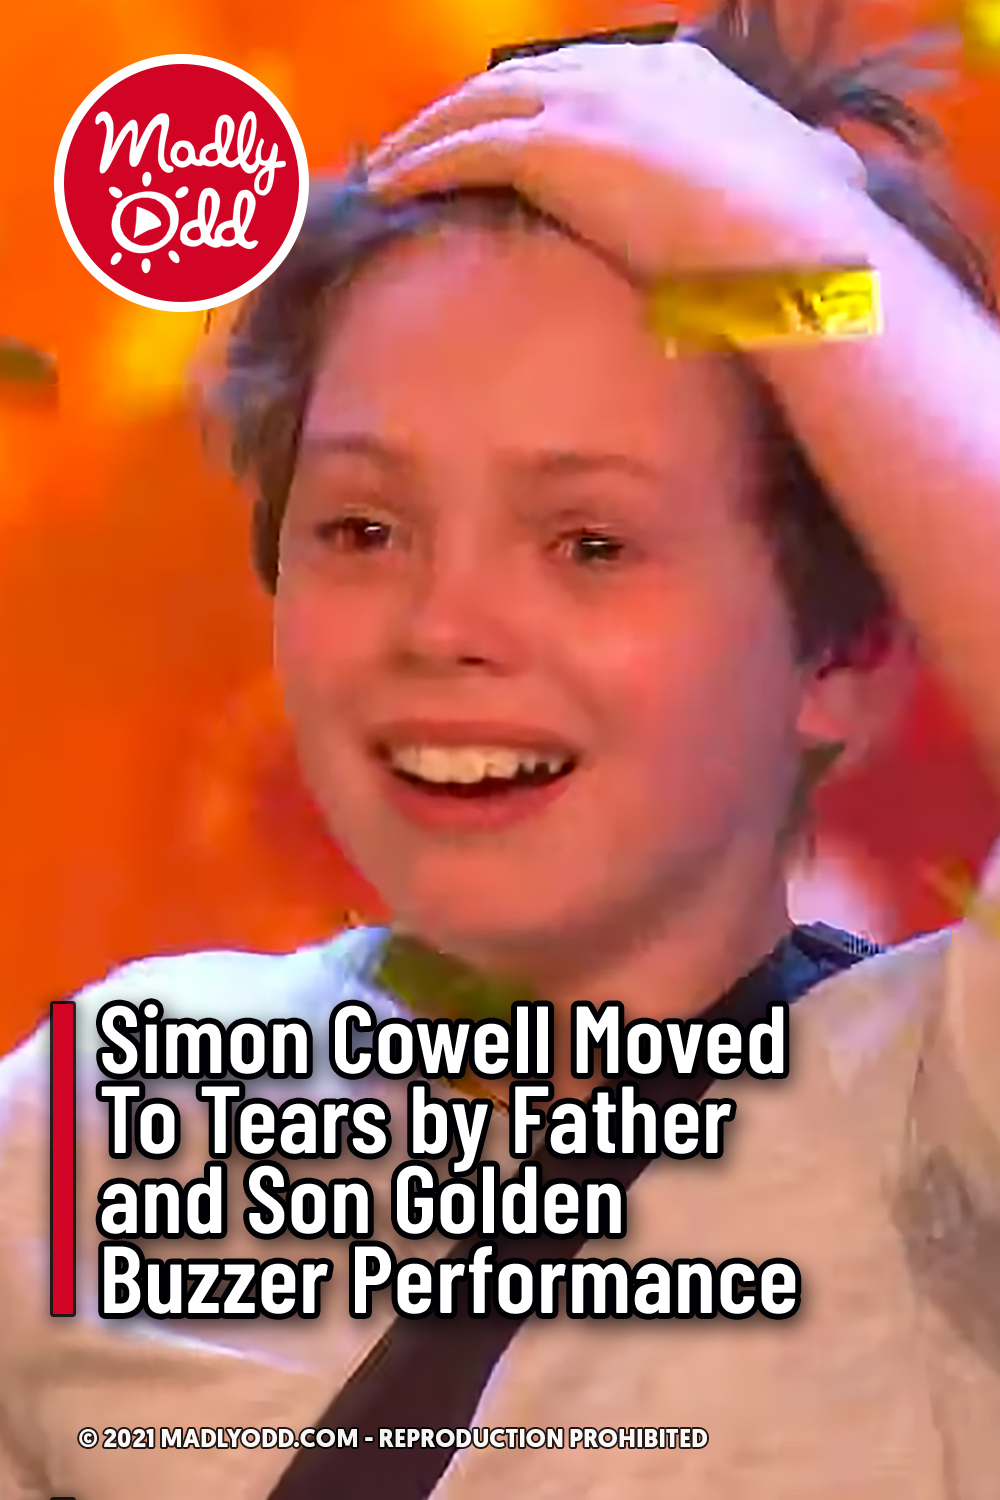 Simon Cowell Moved To Tears by Father and Son Golden Buzzer Performance